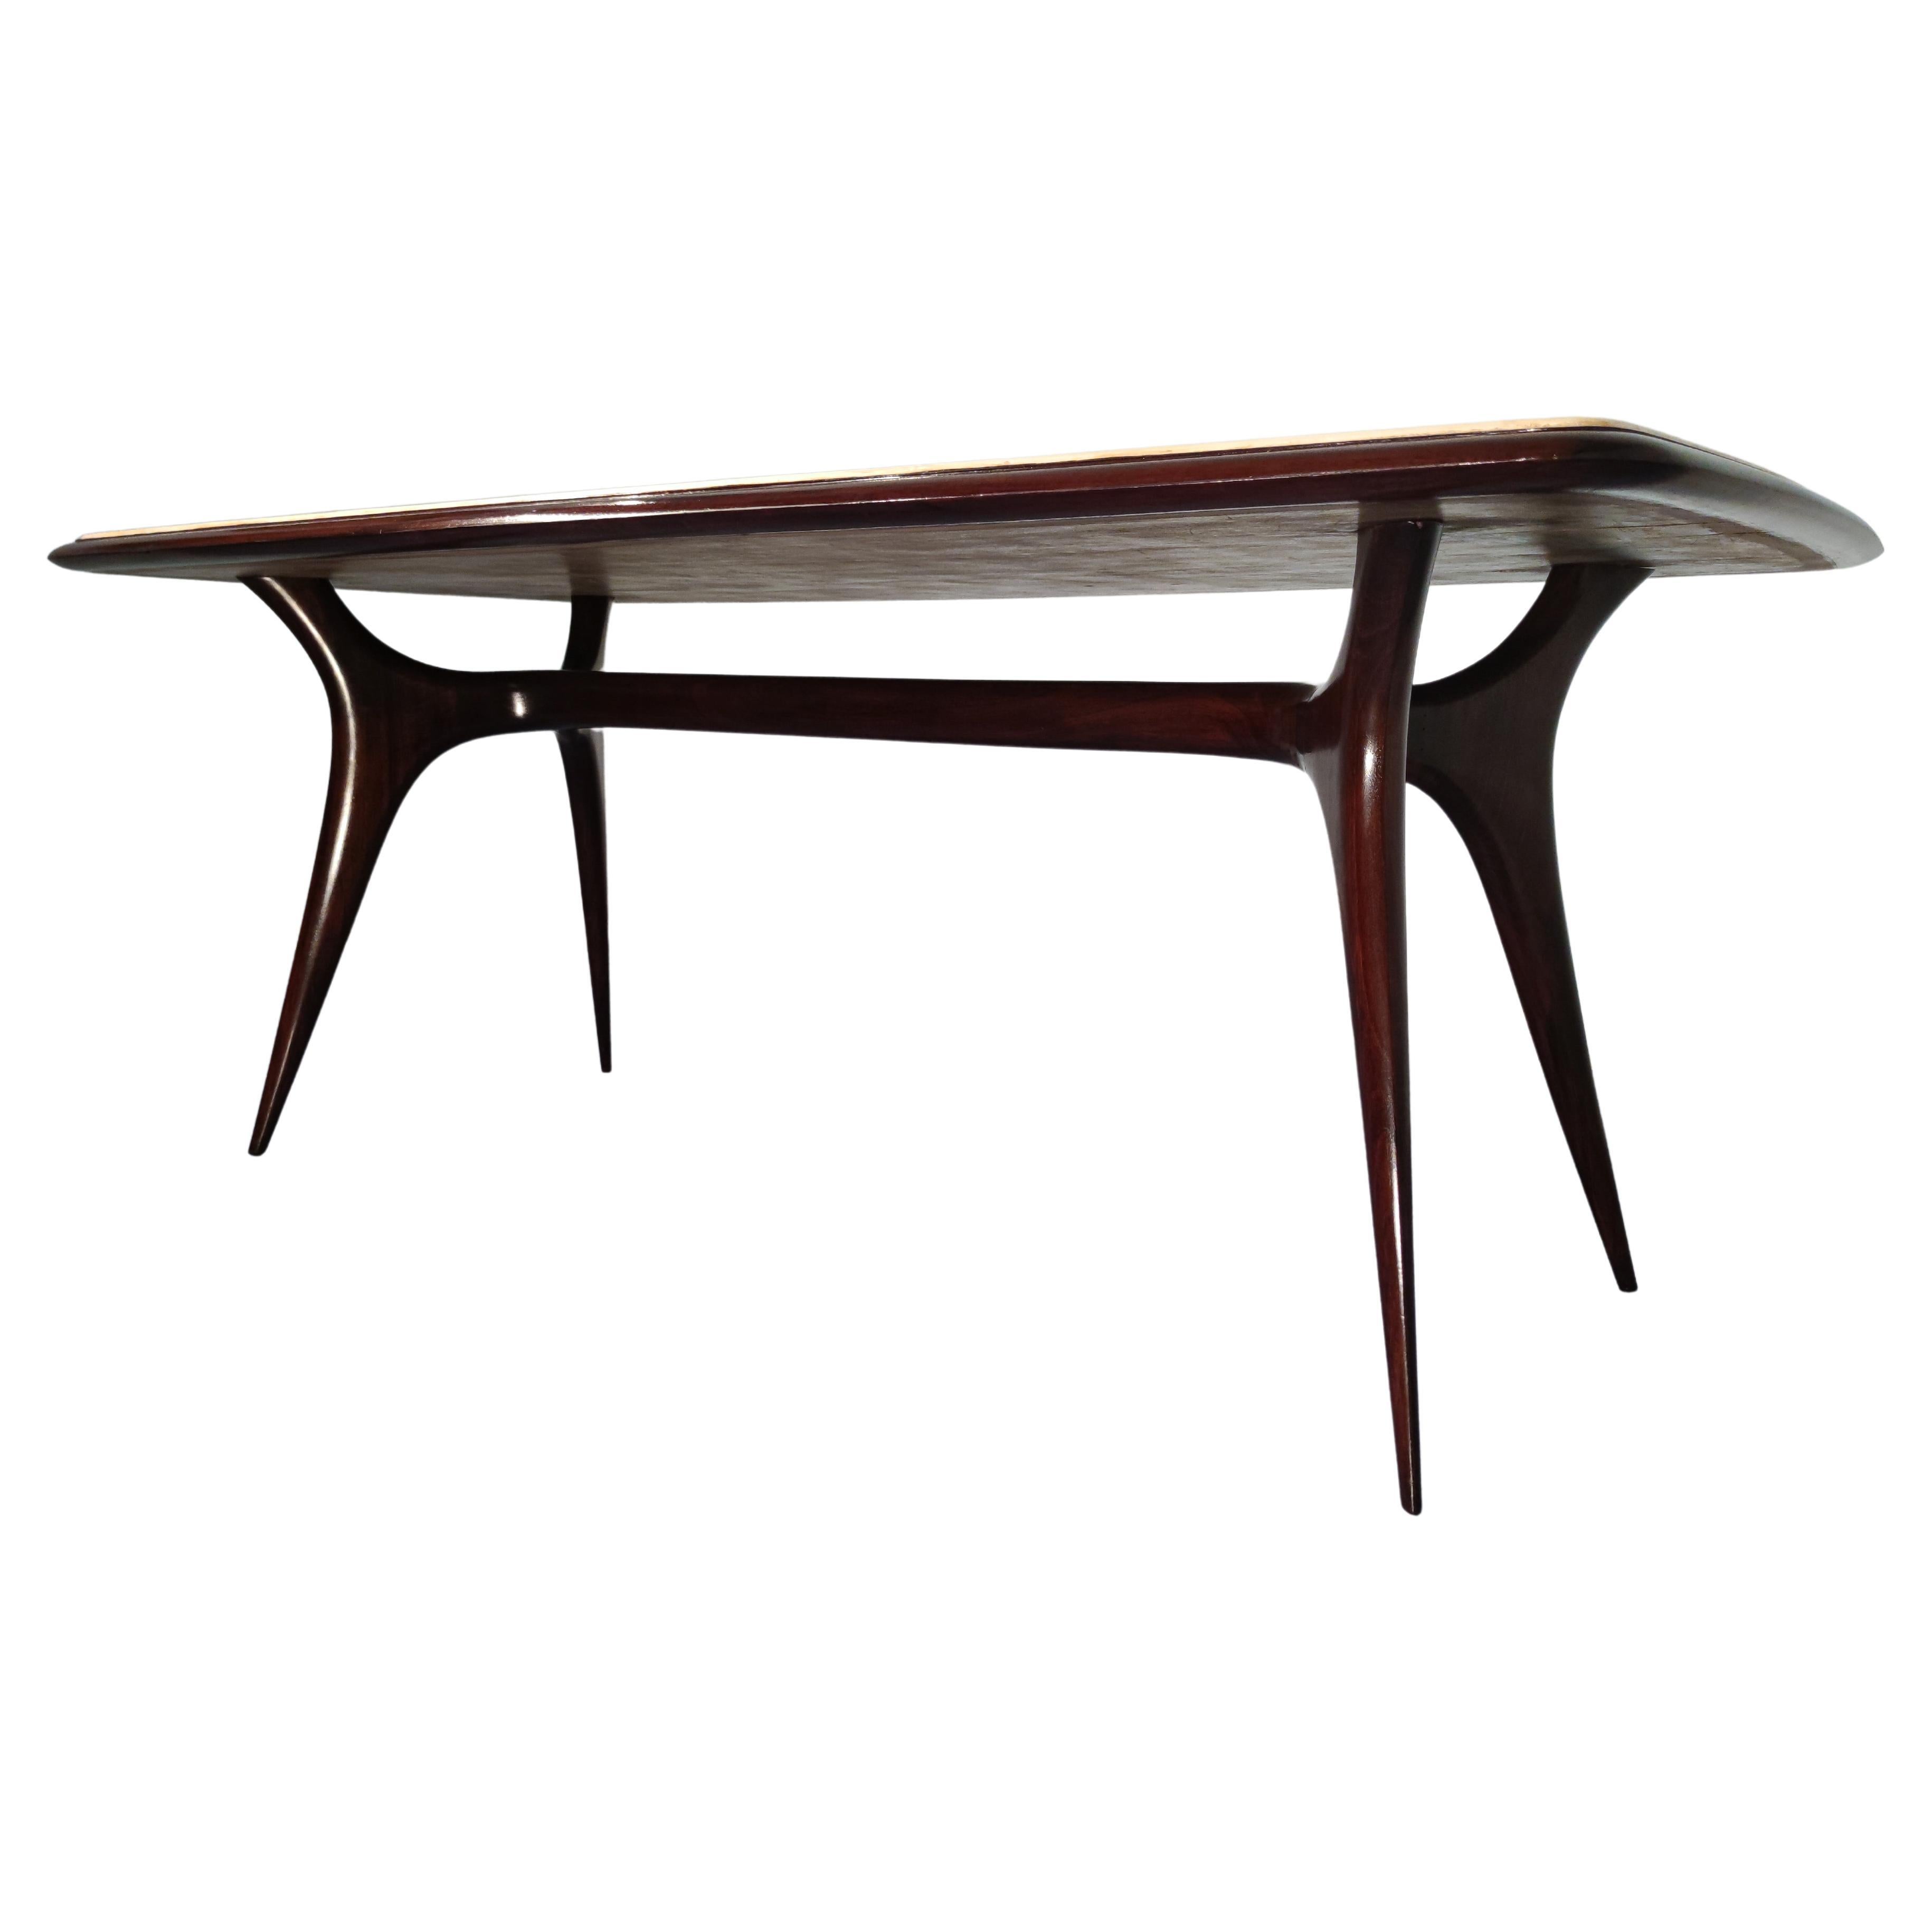 Italian Mid-Century Parchment Dining Table Attributed to Guglielmo Ulrich, 1950s